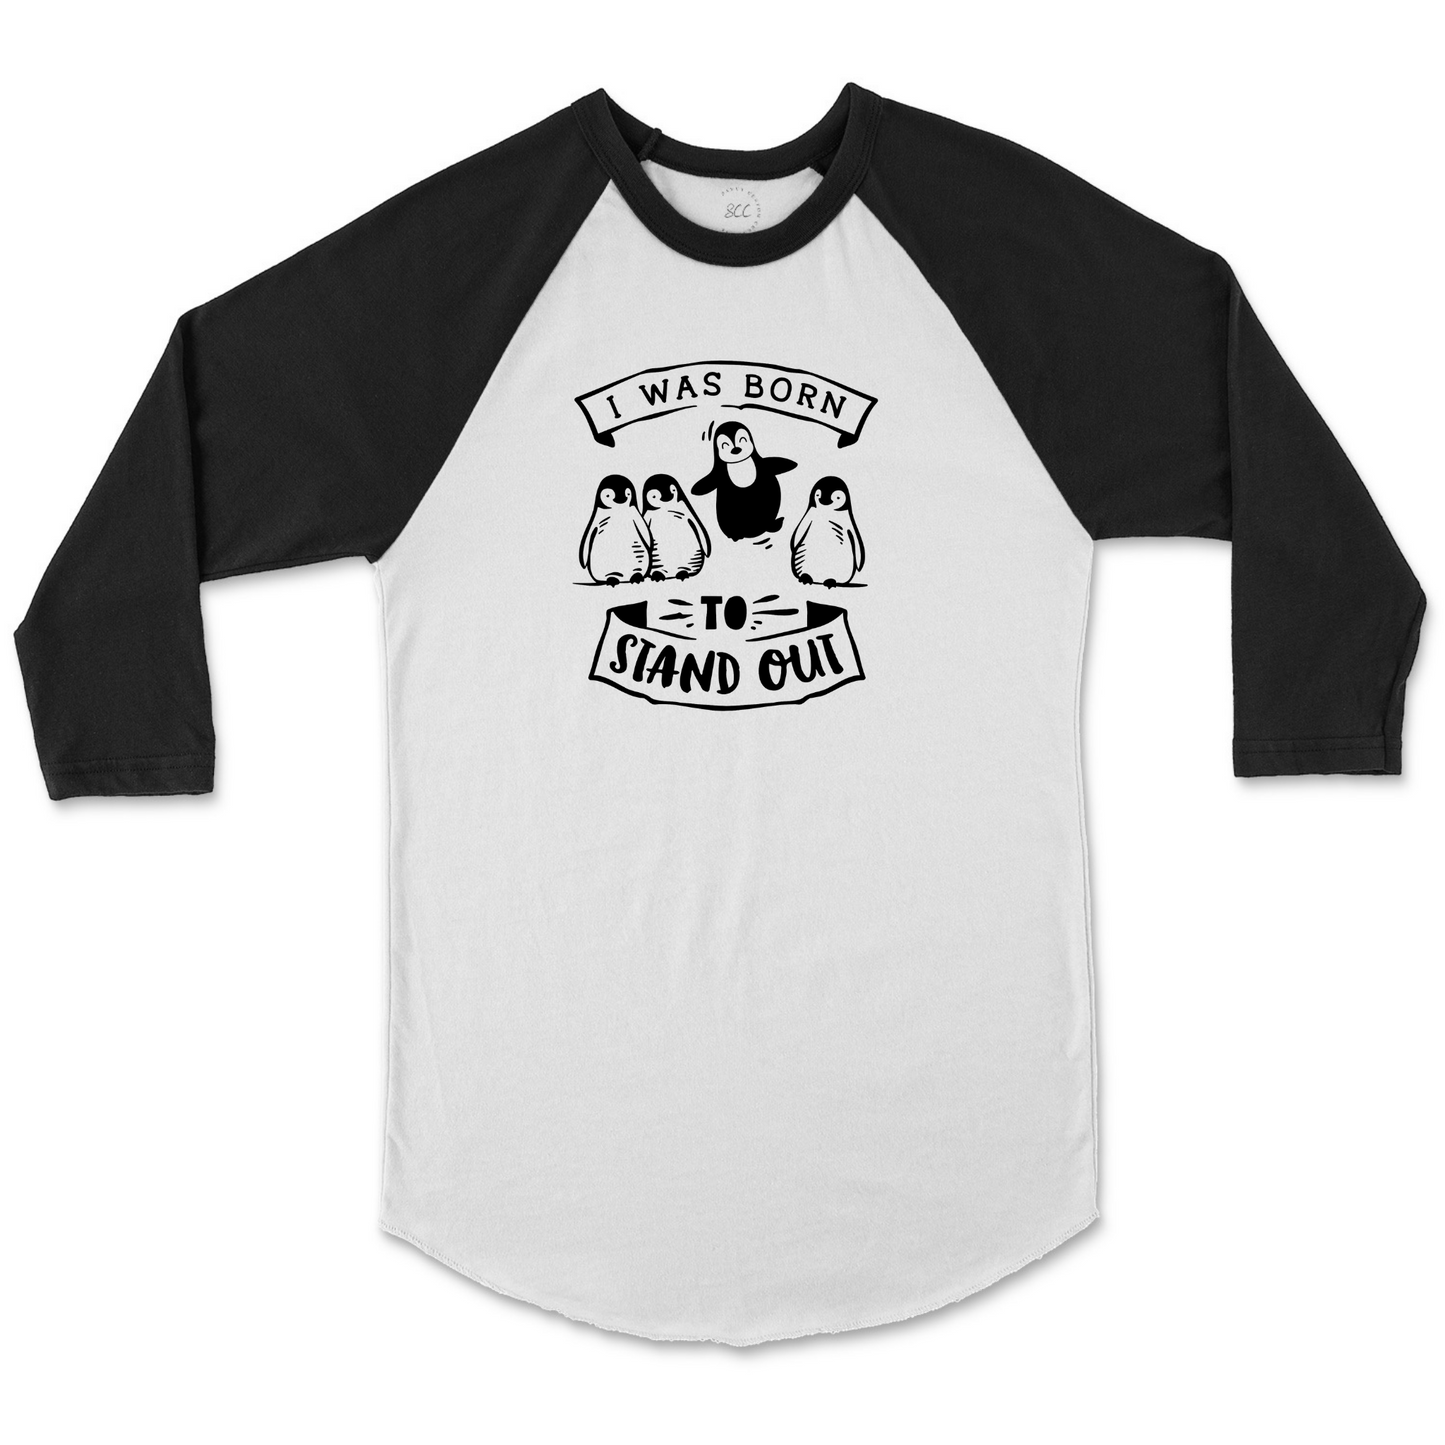 I WAS BORN TO STAND OUT - Unisex Raglan Baseball T-Shirt